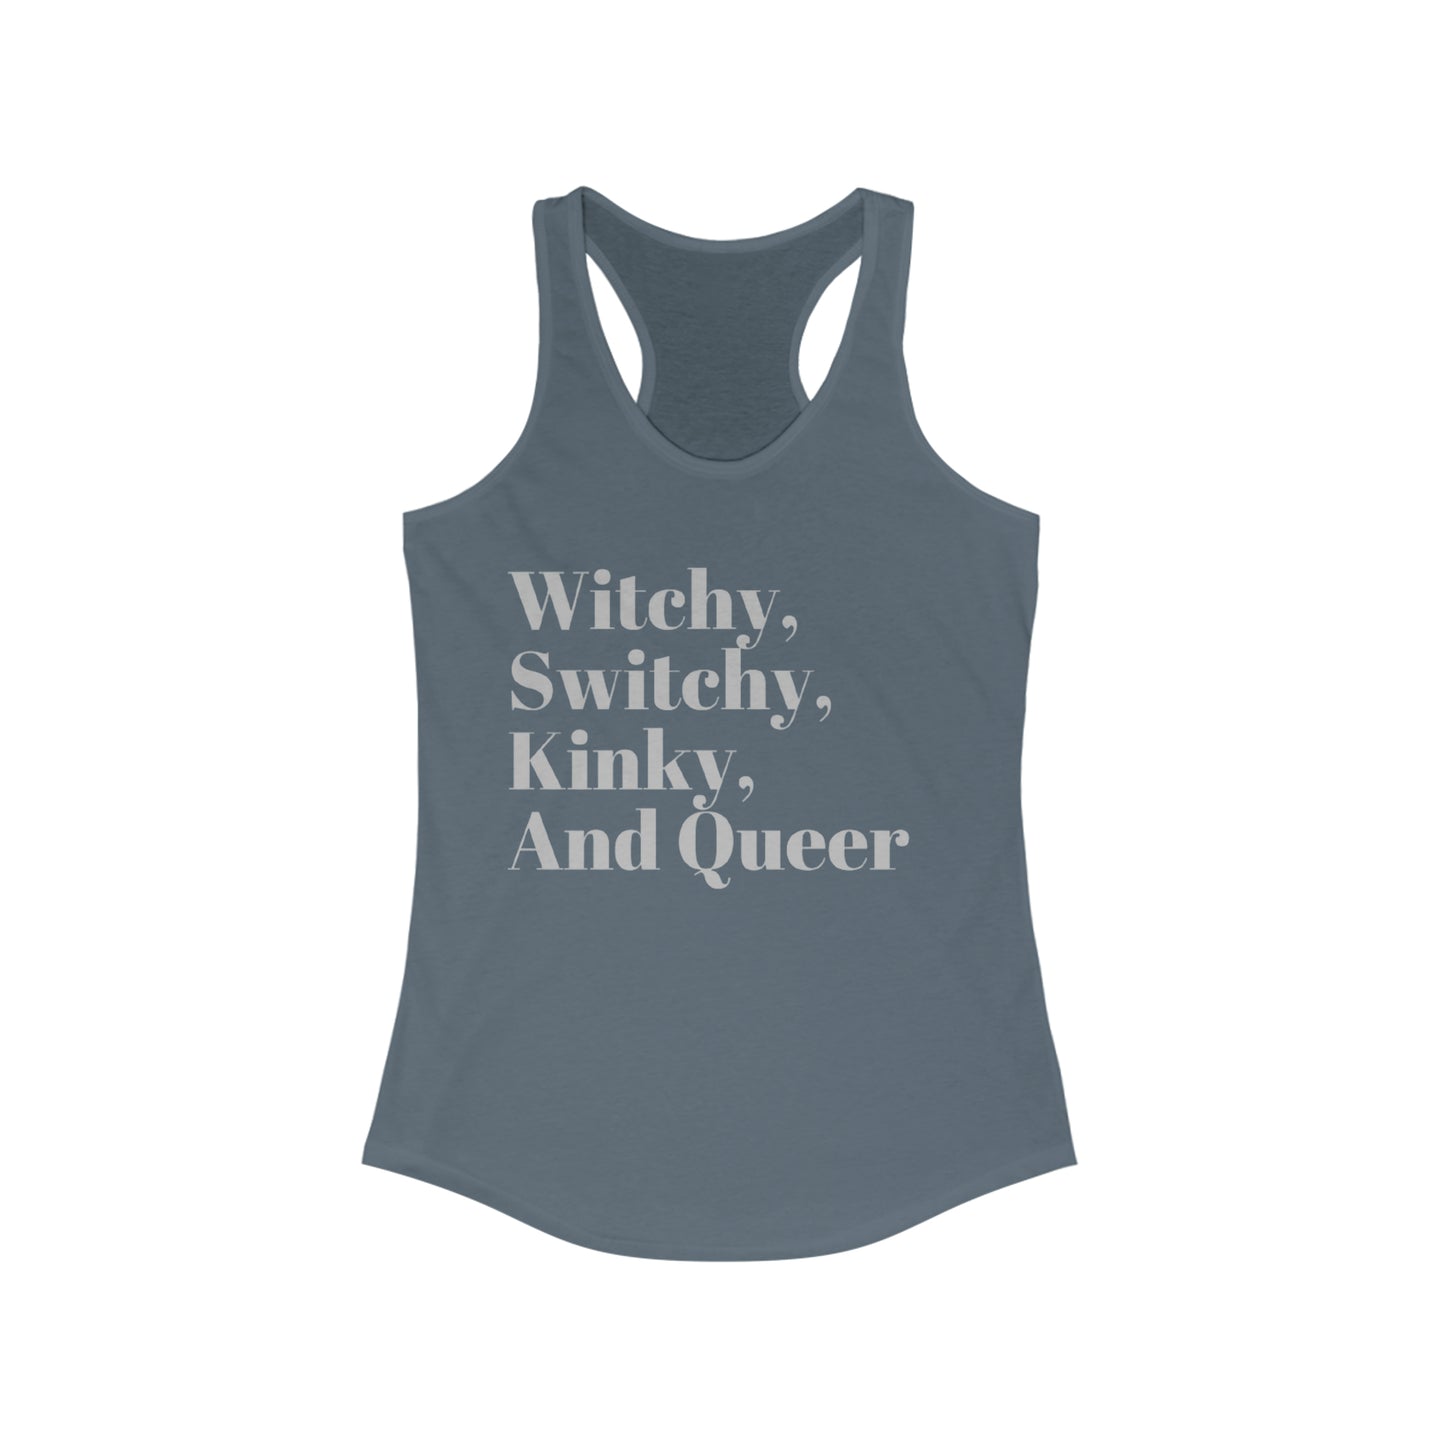 Witchy, Switchy, Kinky, and Queer Women's Racerback Tank